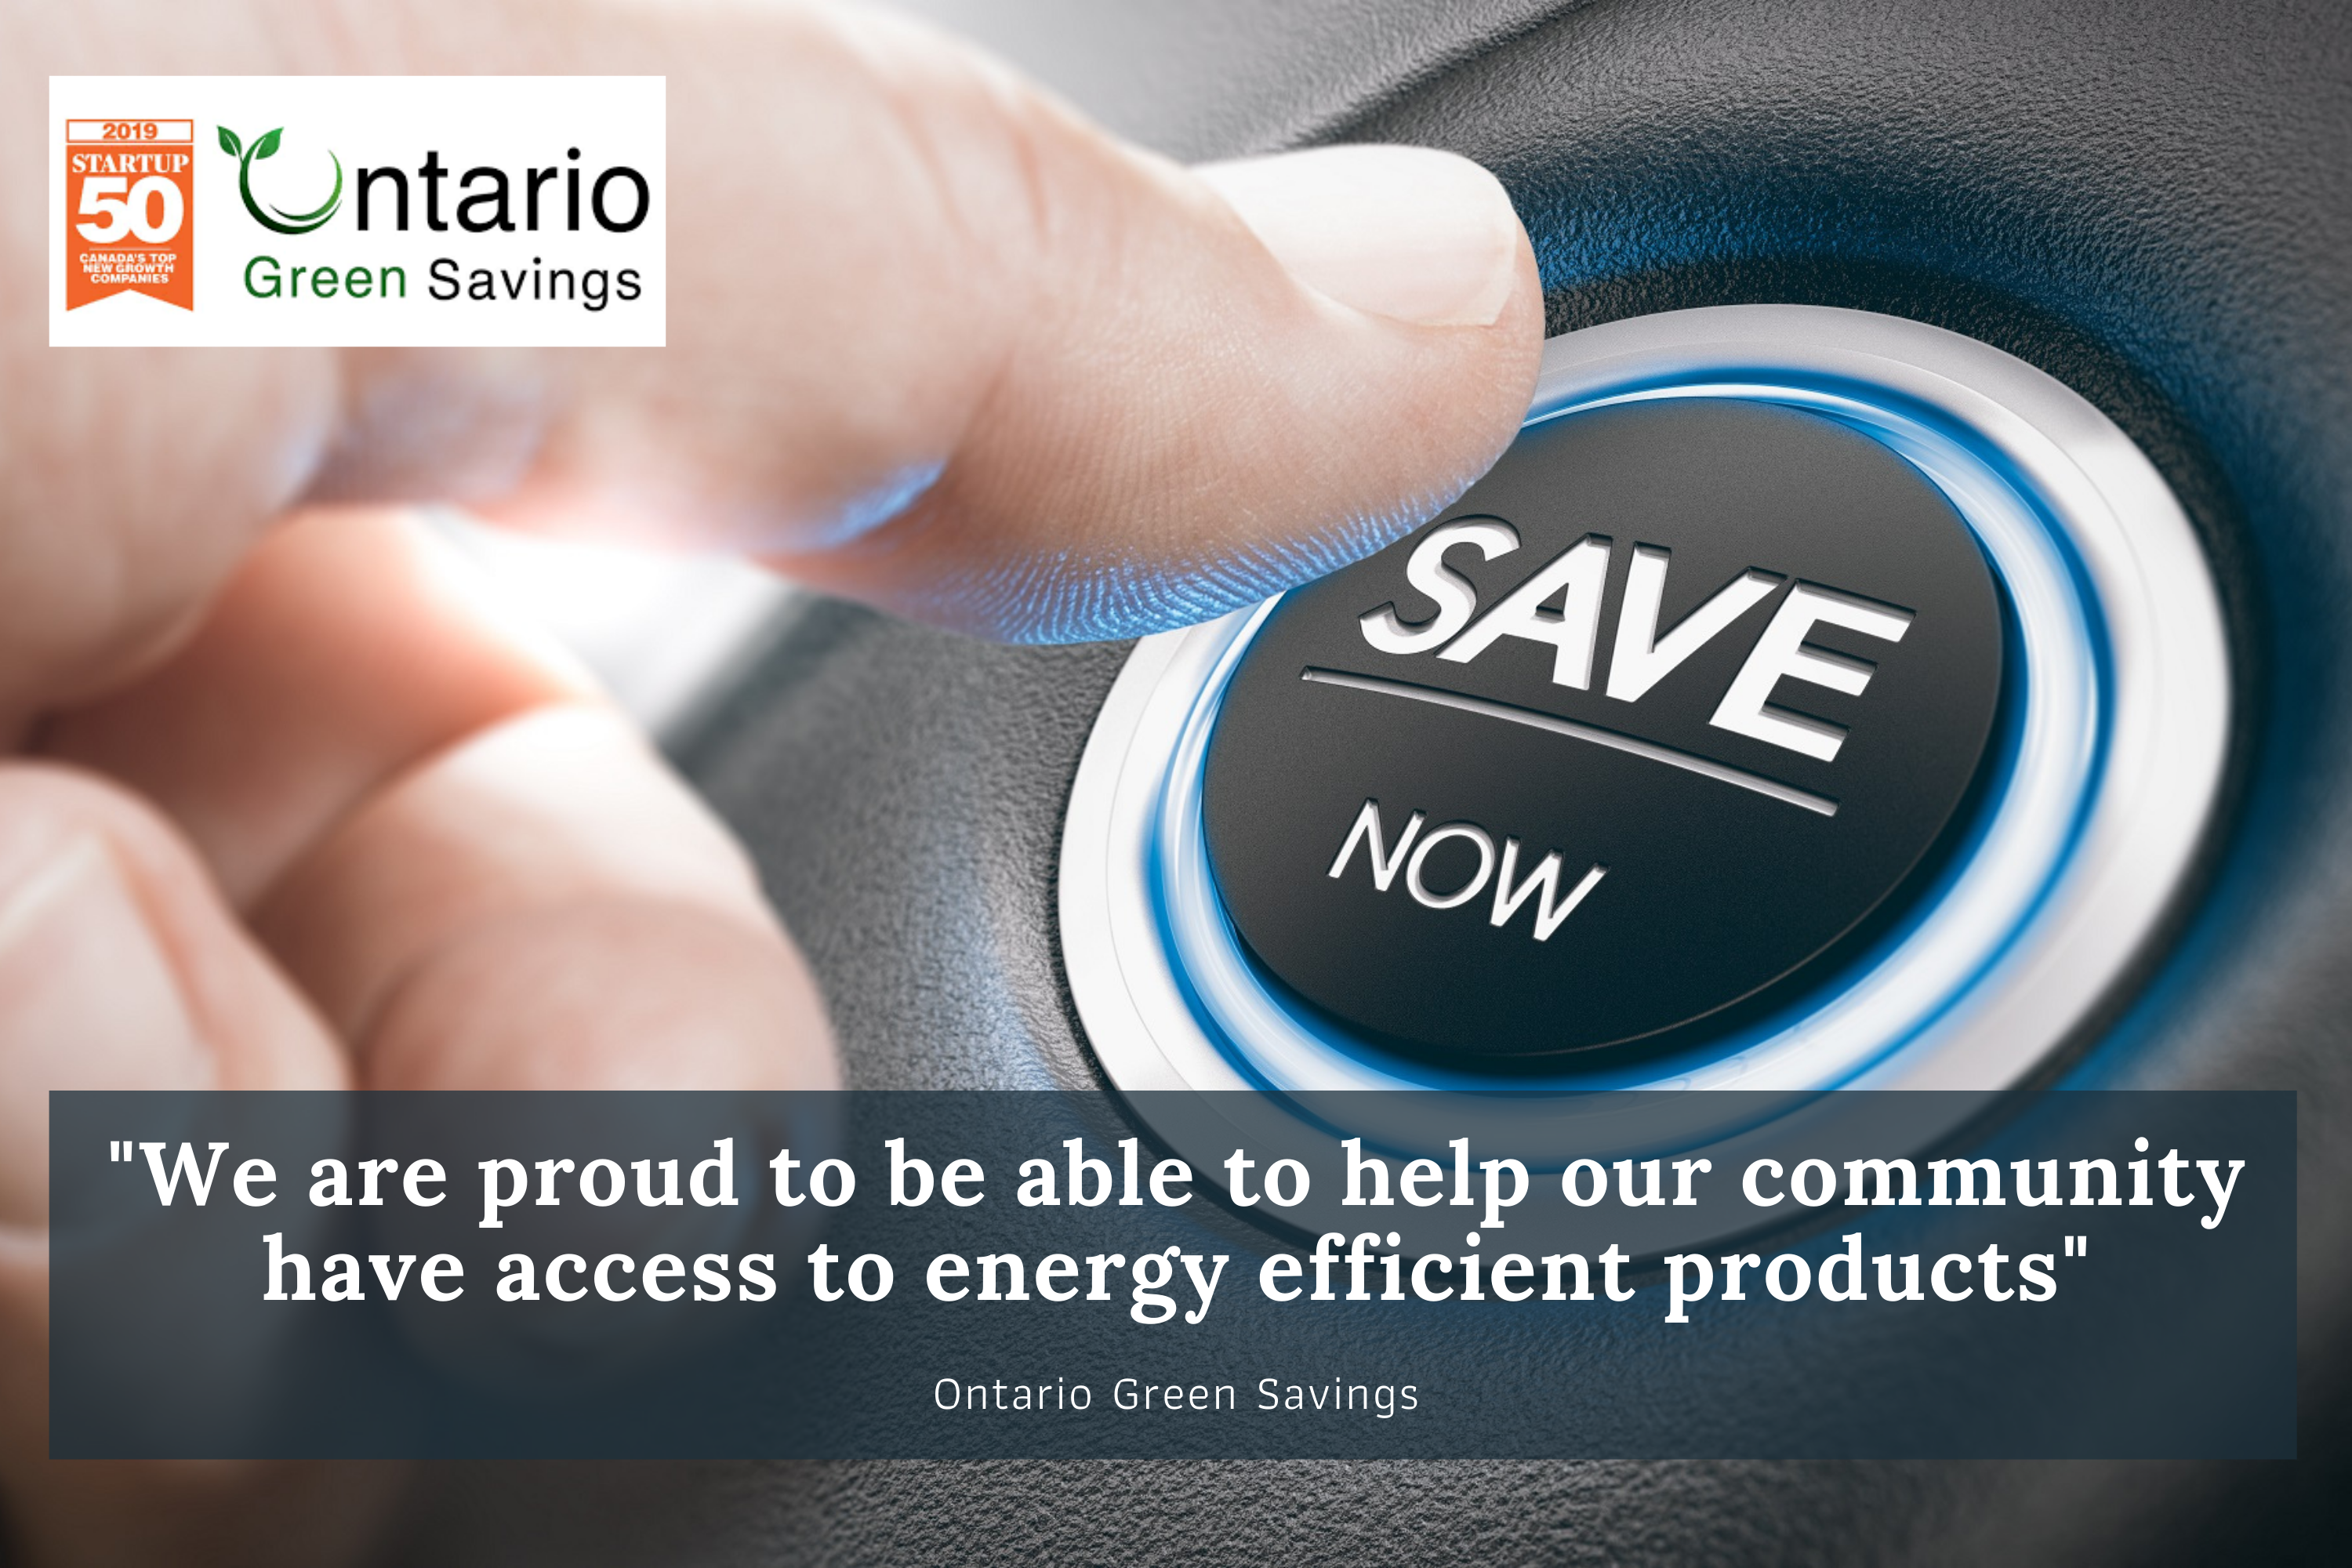 Ontario Green Savings, Monday, January 18, 2021, Press release picture